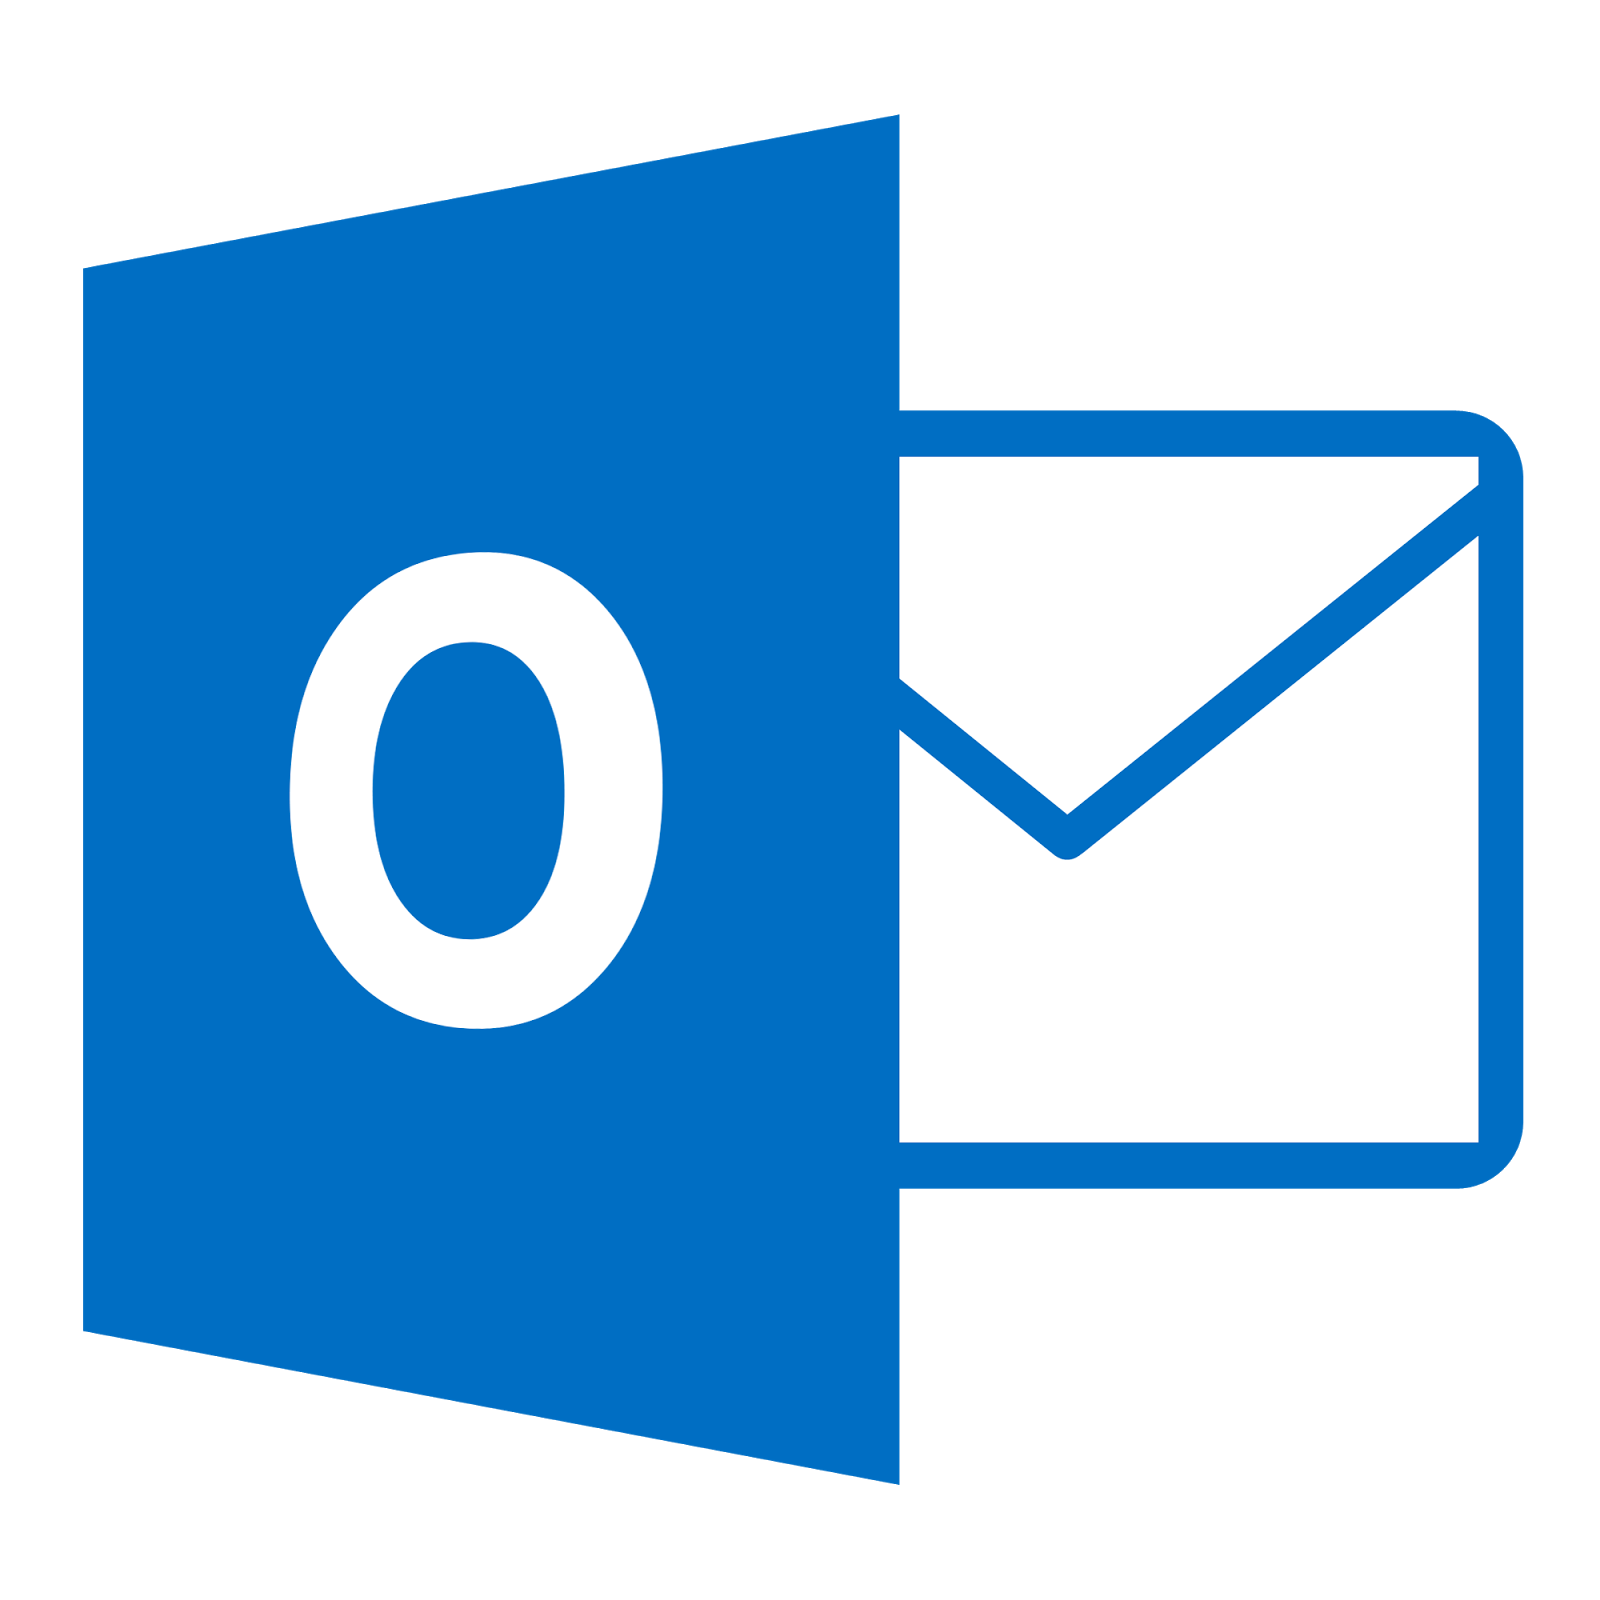 Outlook Office Outlook.Com 365 Microsoft Gmail PNG Image